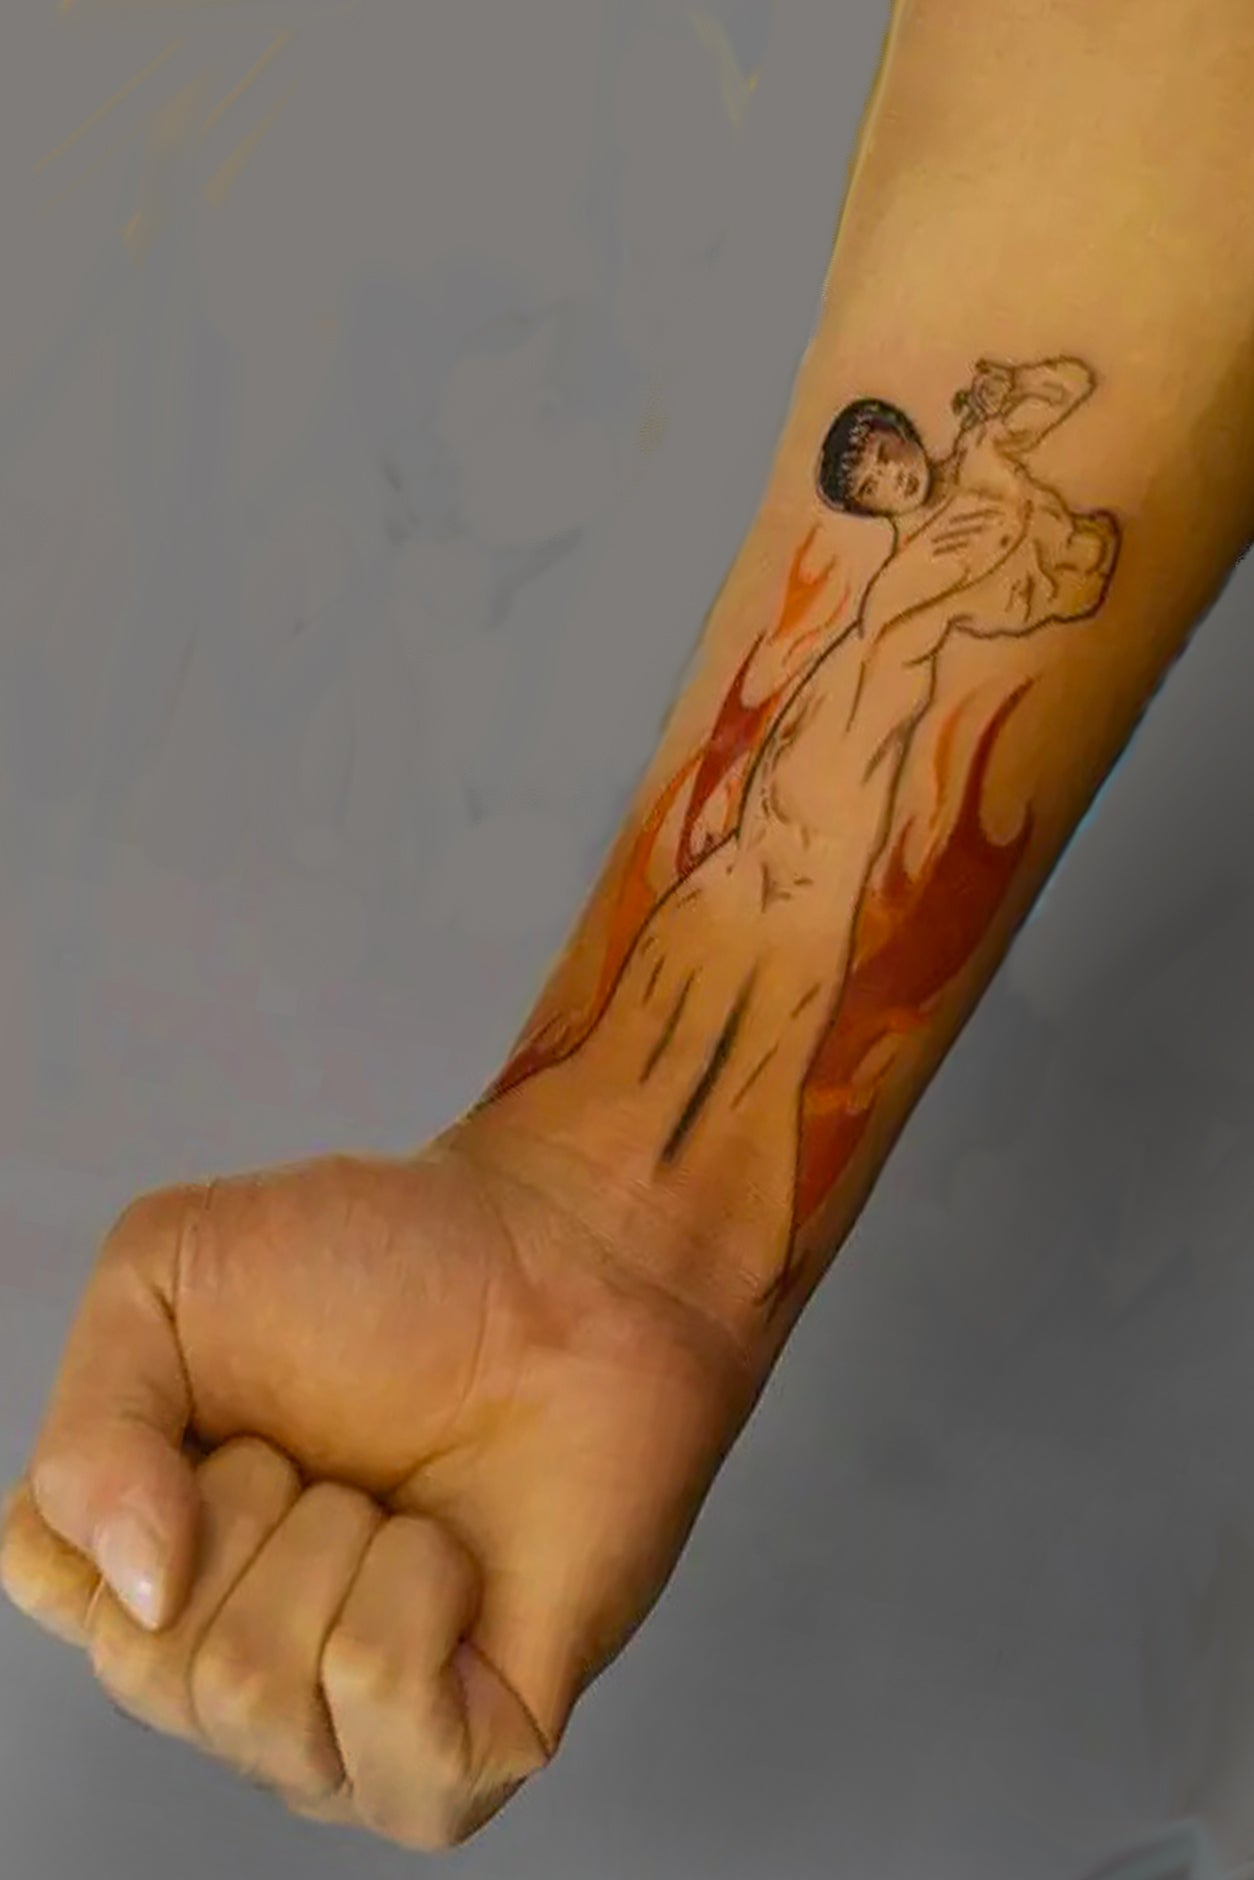 A male arm displays the temporary artwork. There is only one way to wear this tag, and the suggested placement is at the lower portion of your arm so that your fist finishes the martial art person's punch..